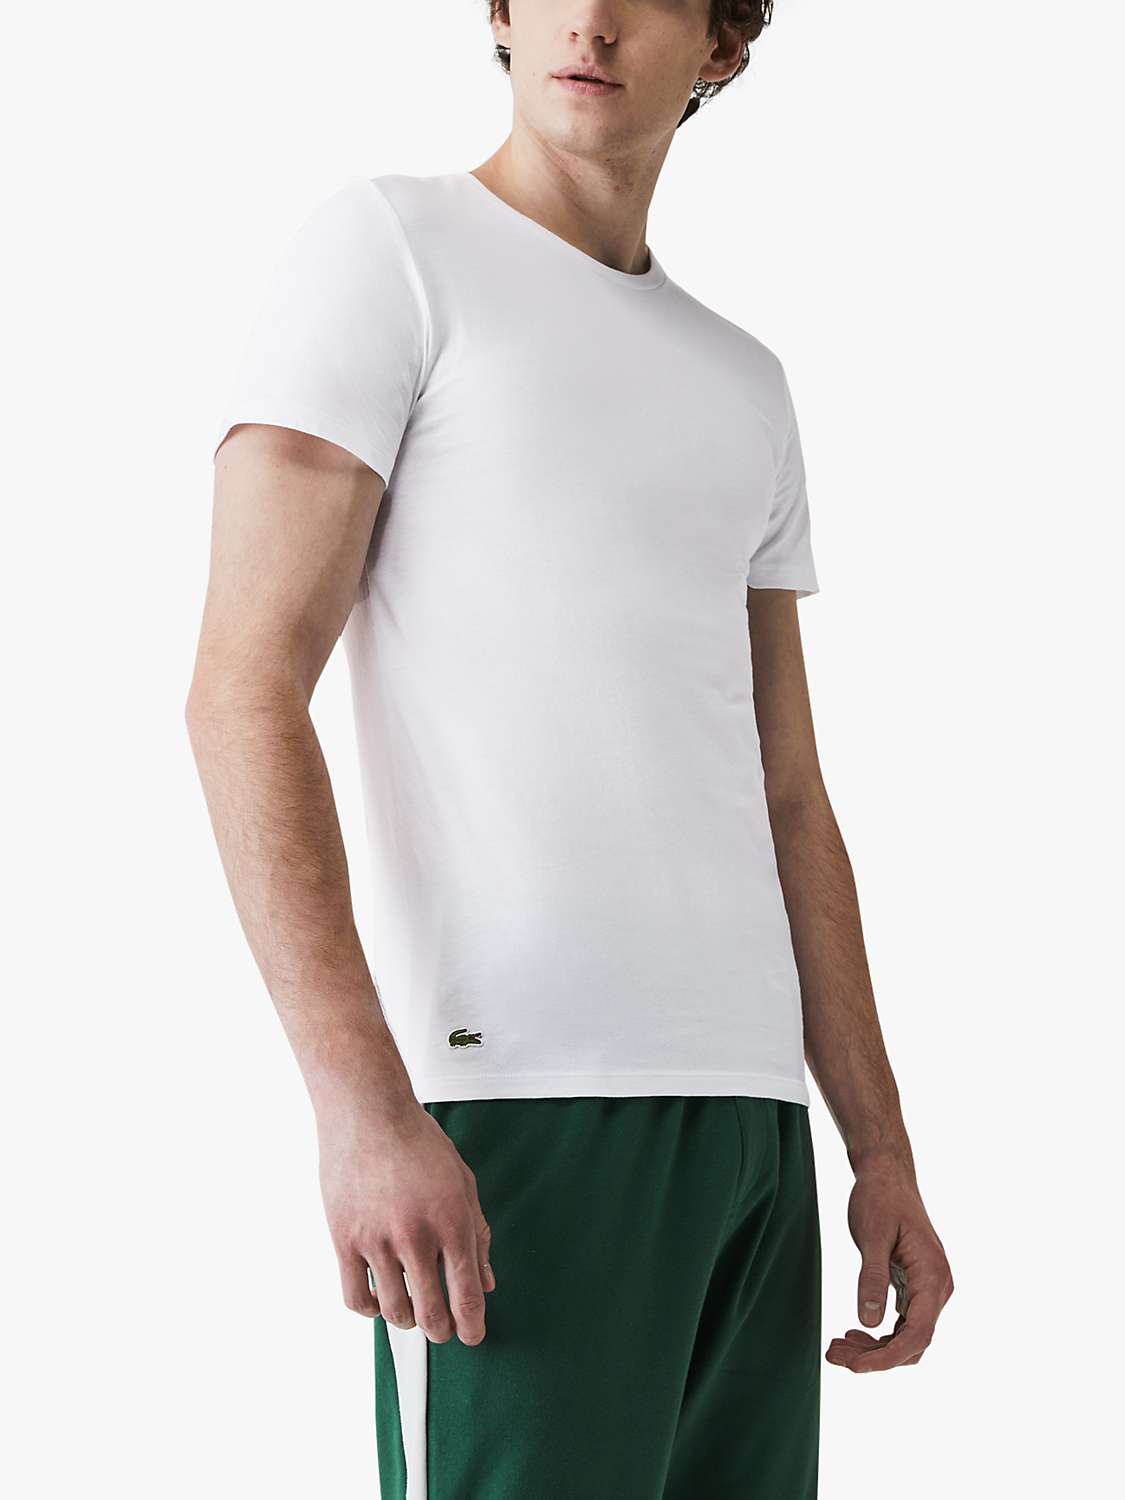 Buy Lacoste Cotton Lounge T-Shirt, Pack of 3, Black/White/Grey Online at johnlewis.com